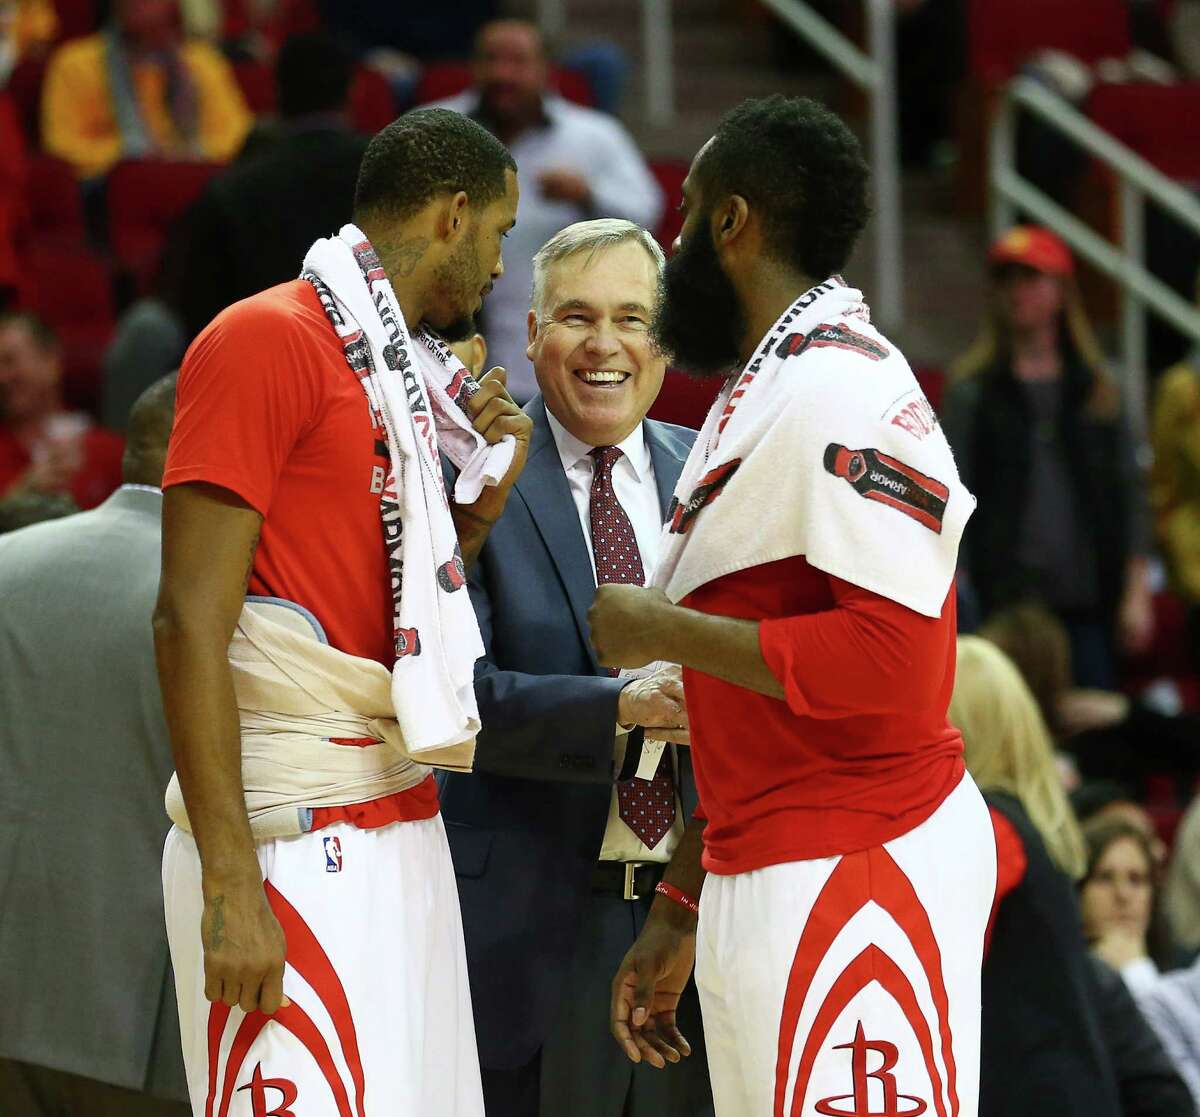 Rockets coach Mike D'Antoni, center, talks with Trevor Ariza, left, and James Harden. D'Antoni says the team is all-in every day, making coaching fun.